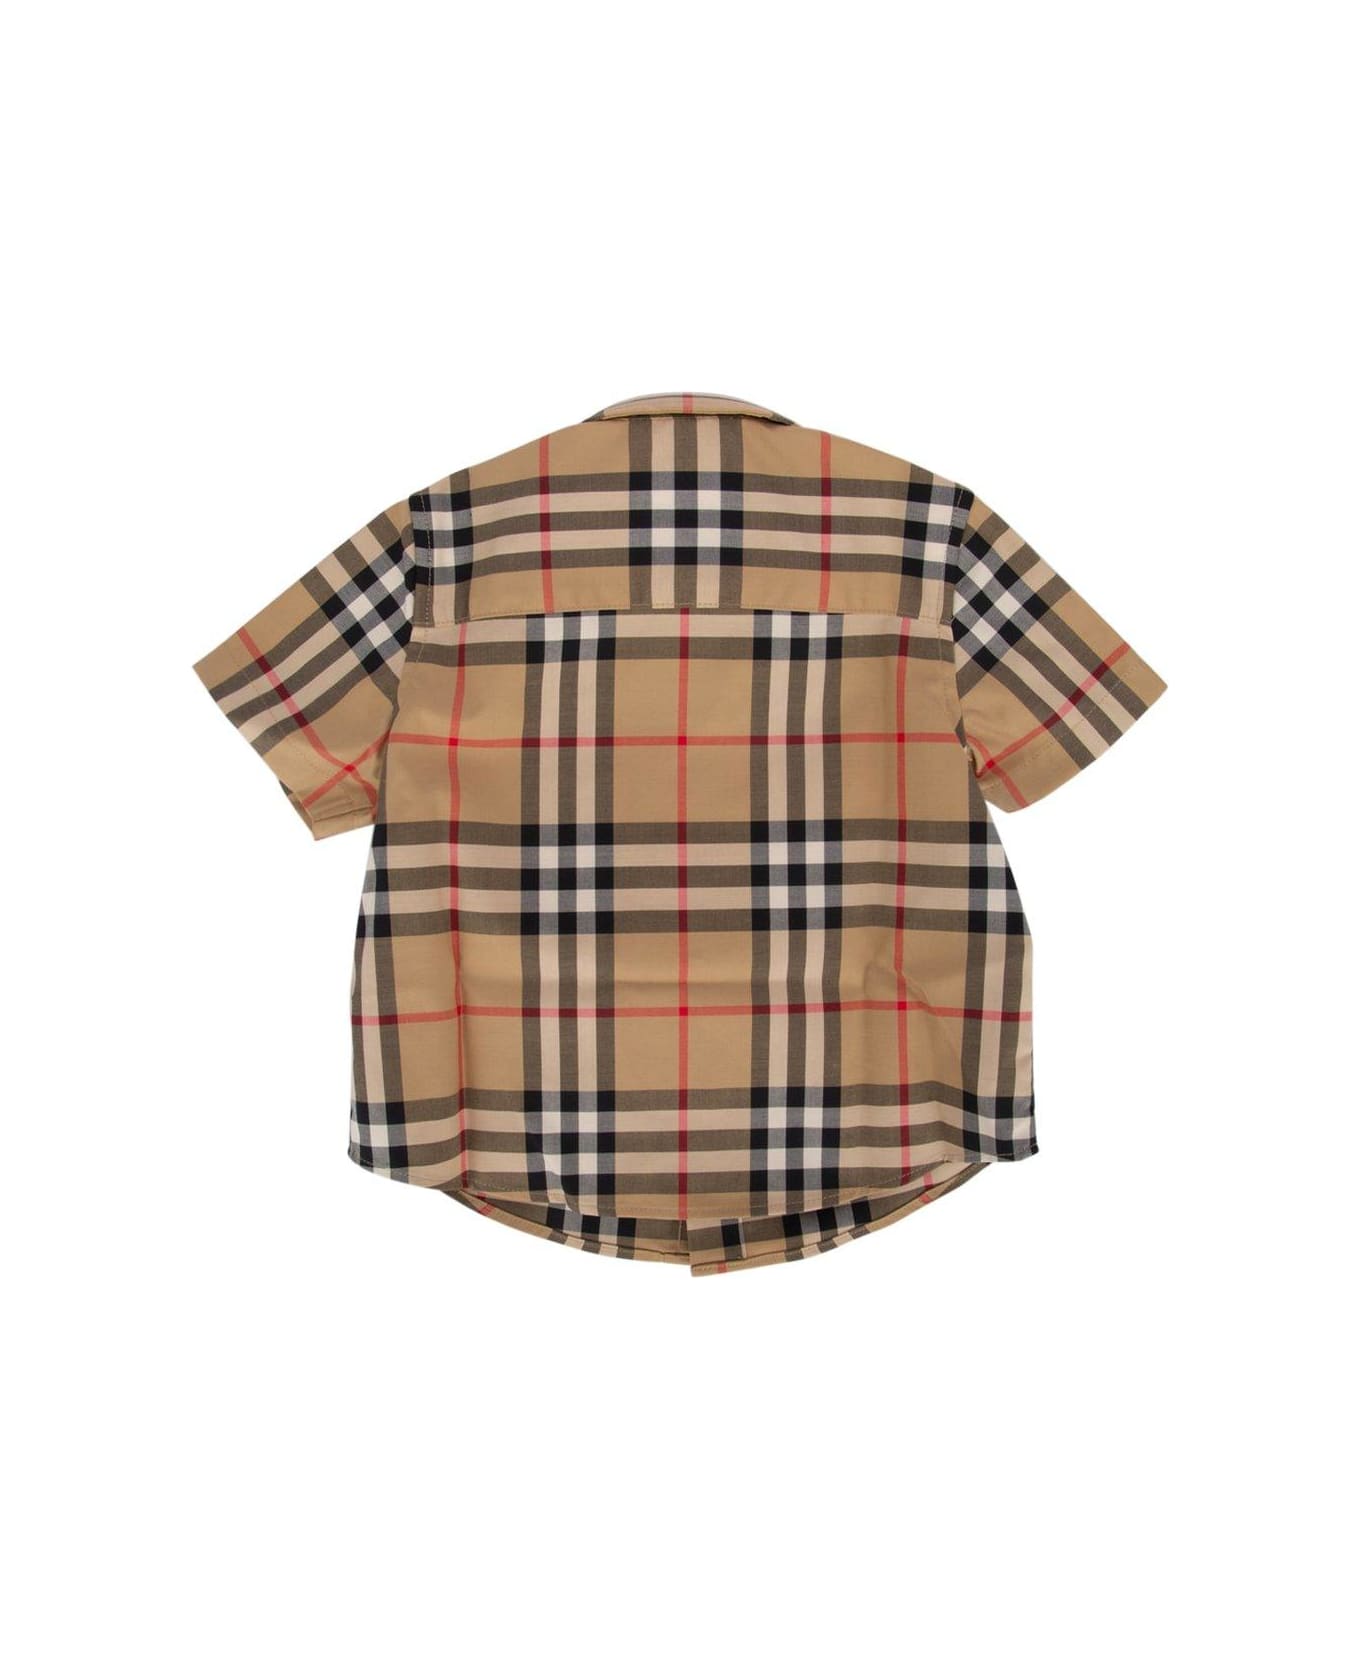 Burberry Check Pattern Short-sleeved Shirt - Archive beige ip chk シャツ